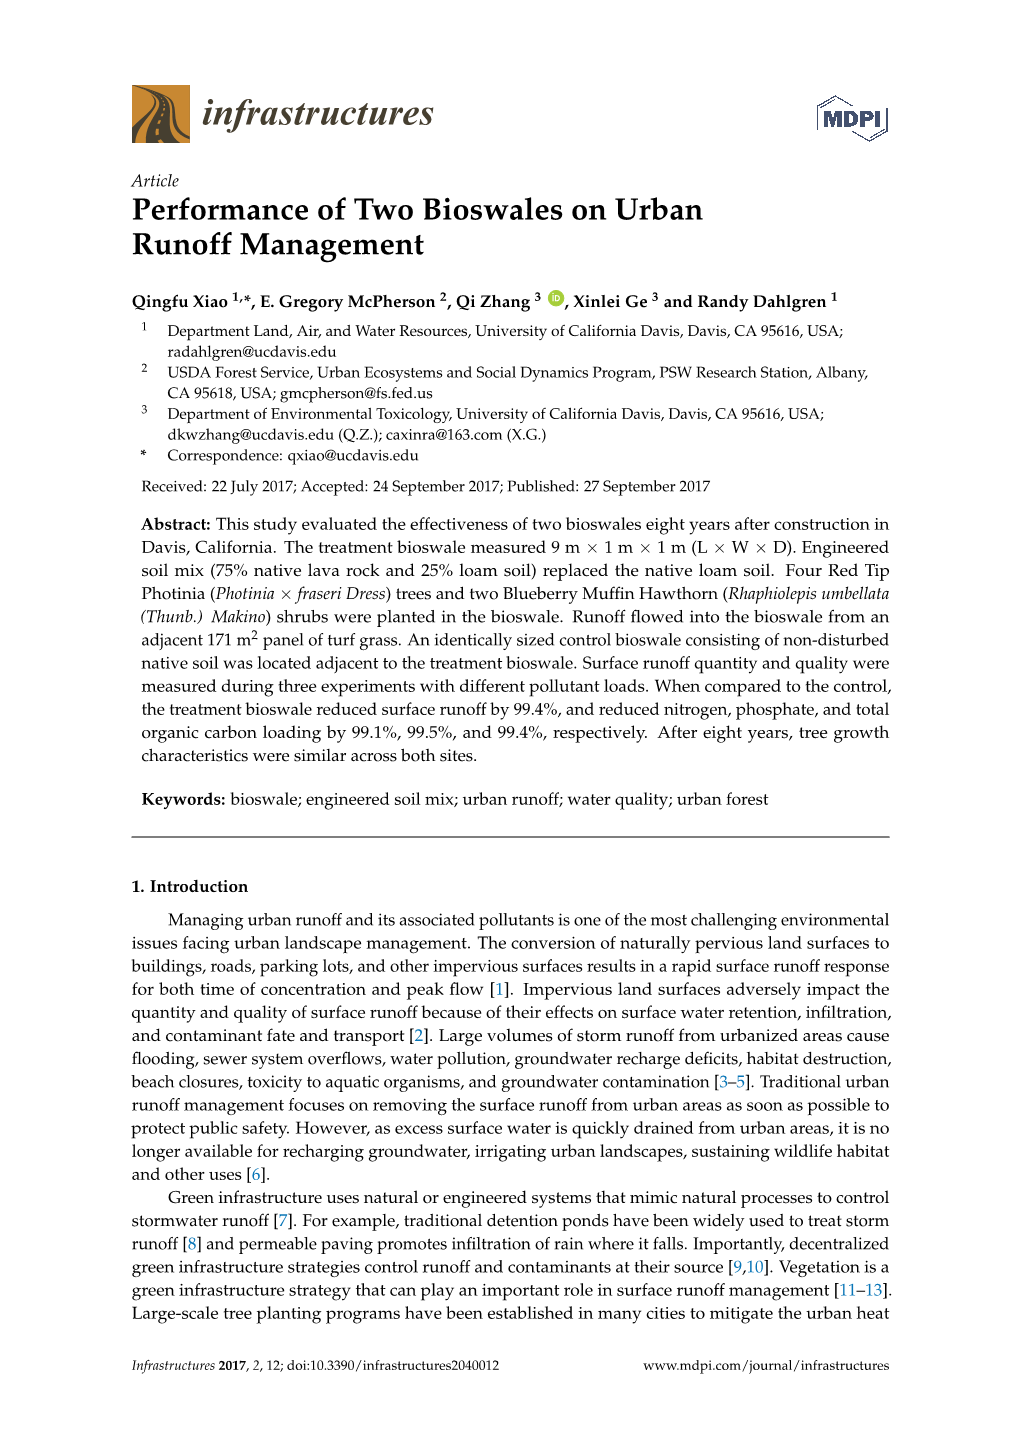 Performance of Two Bioswales on Urban Runoff Management